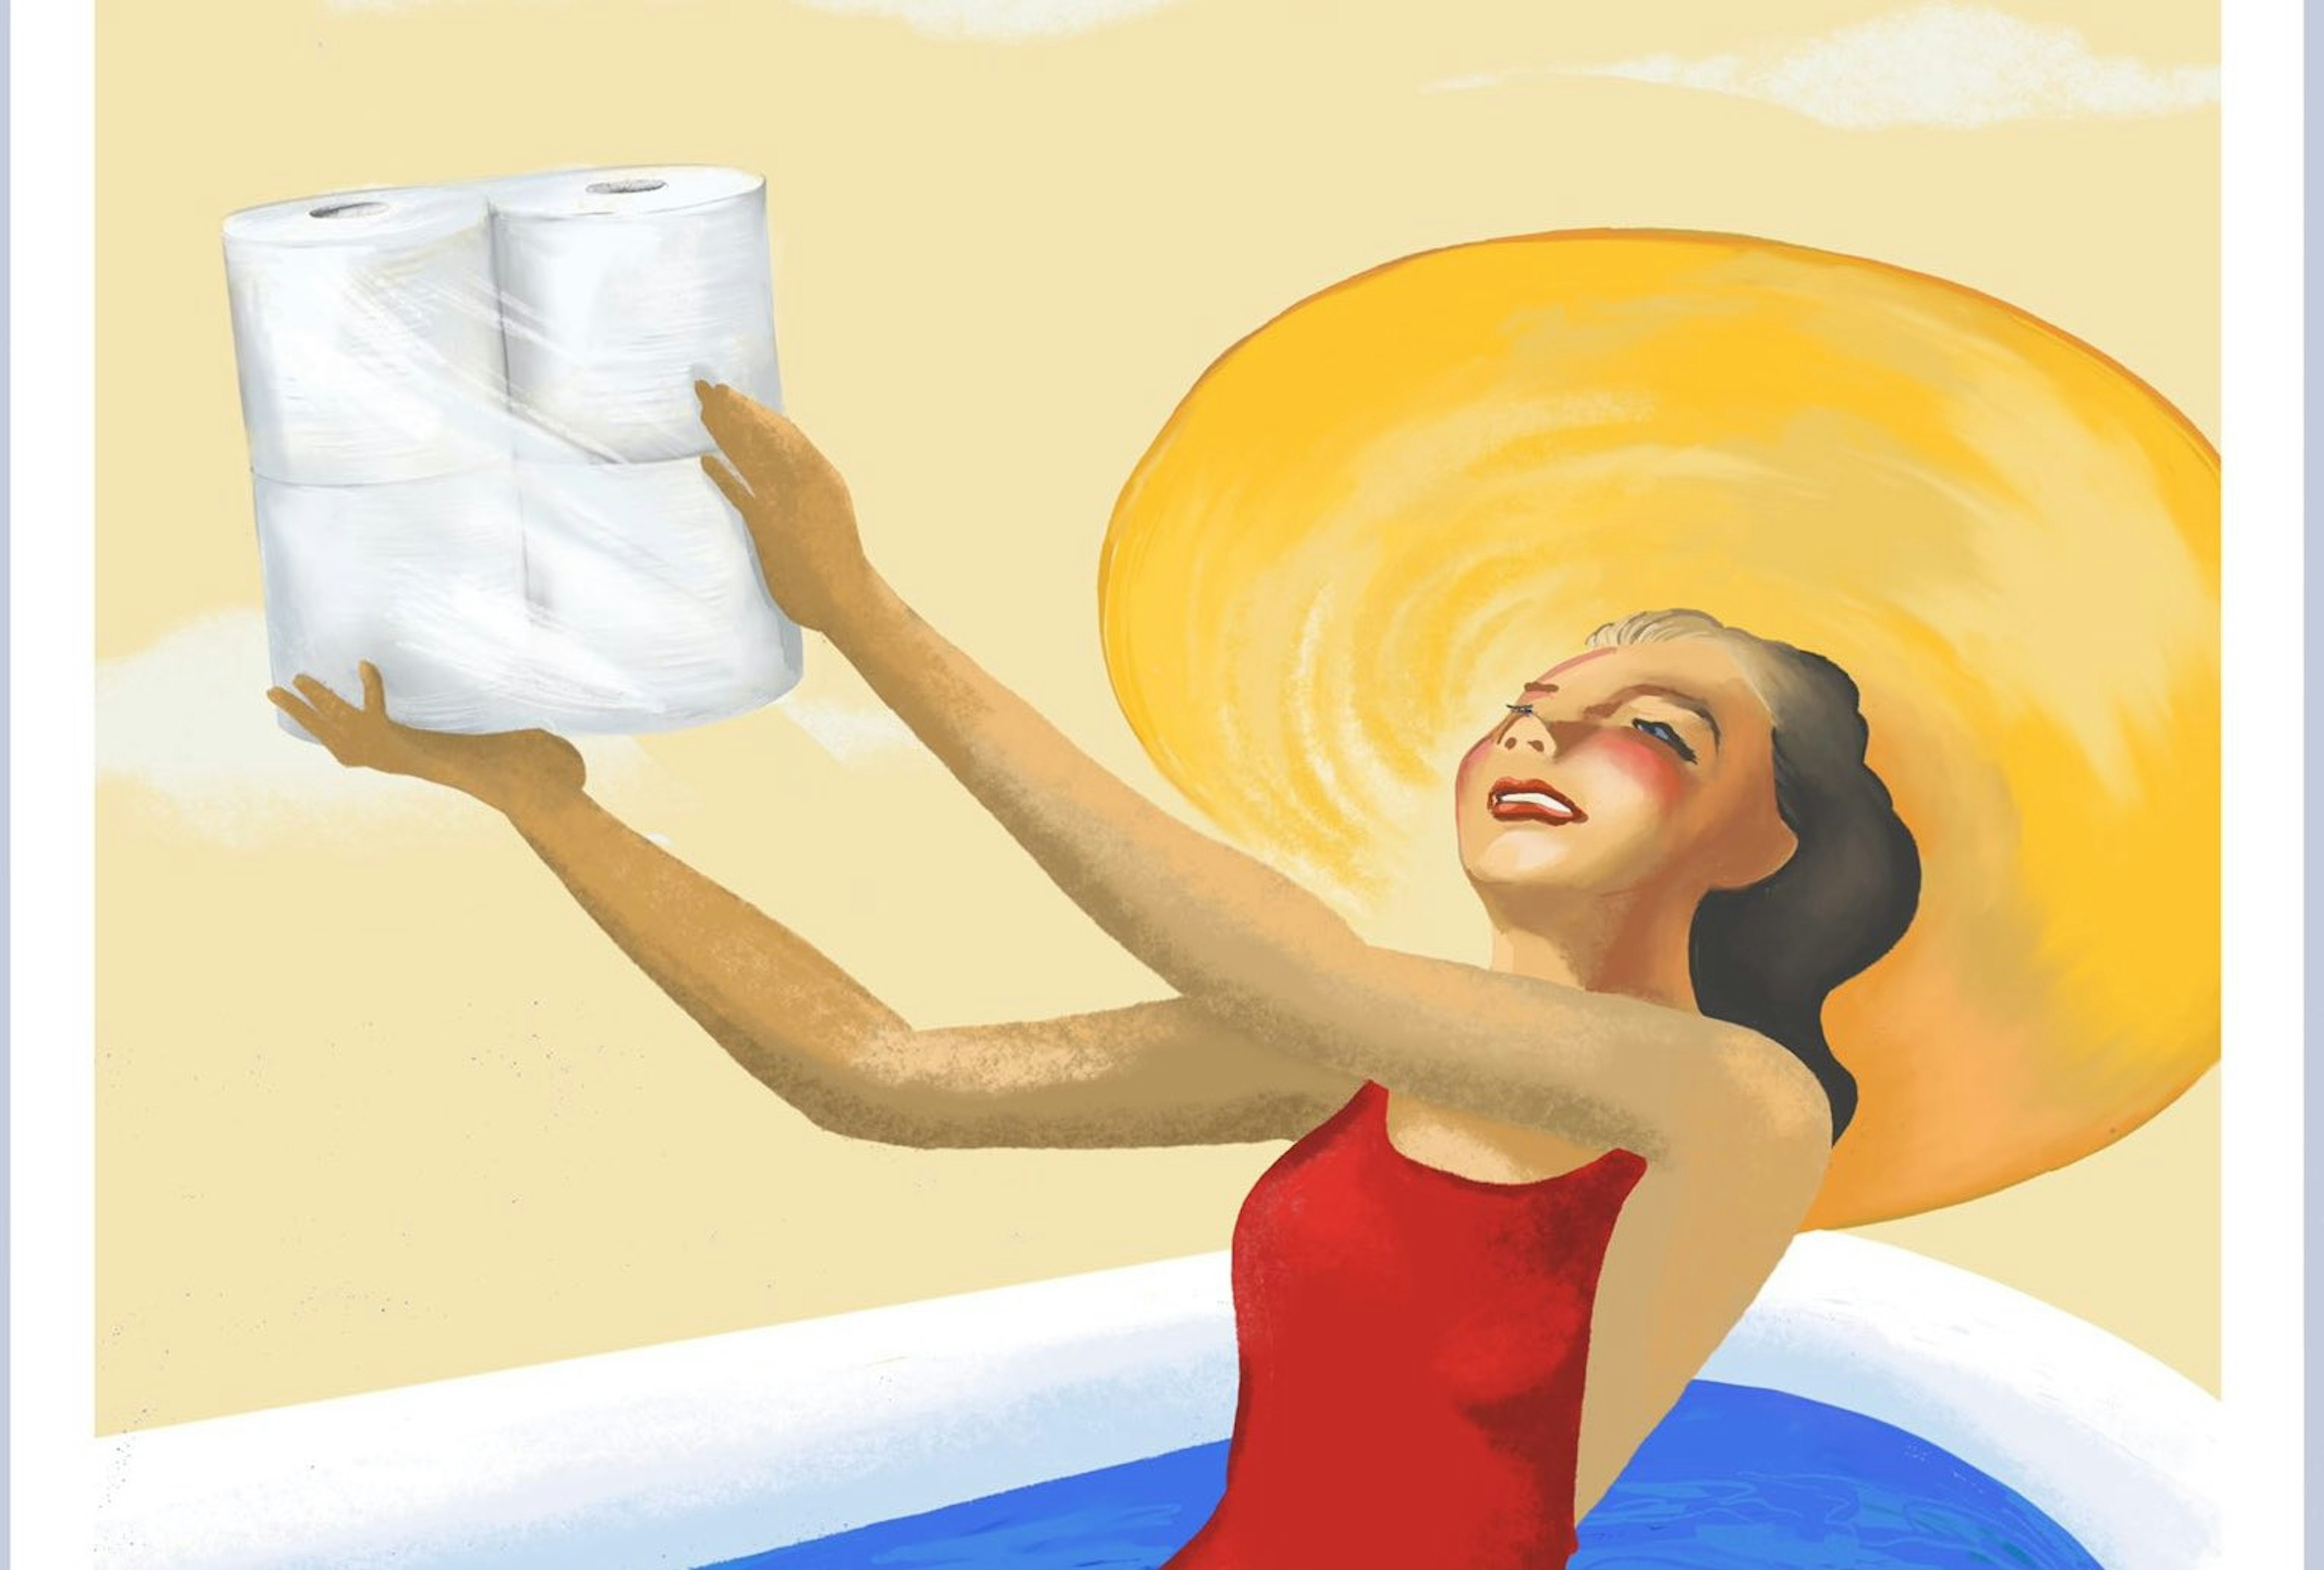 A vintage style illustration of a woman in a red swimsuit with a sun hat holding four rolls of toilet paper exultantly